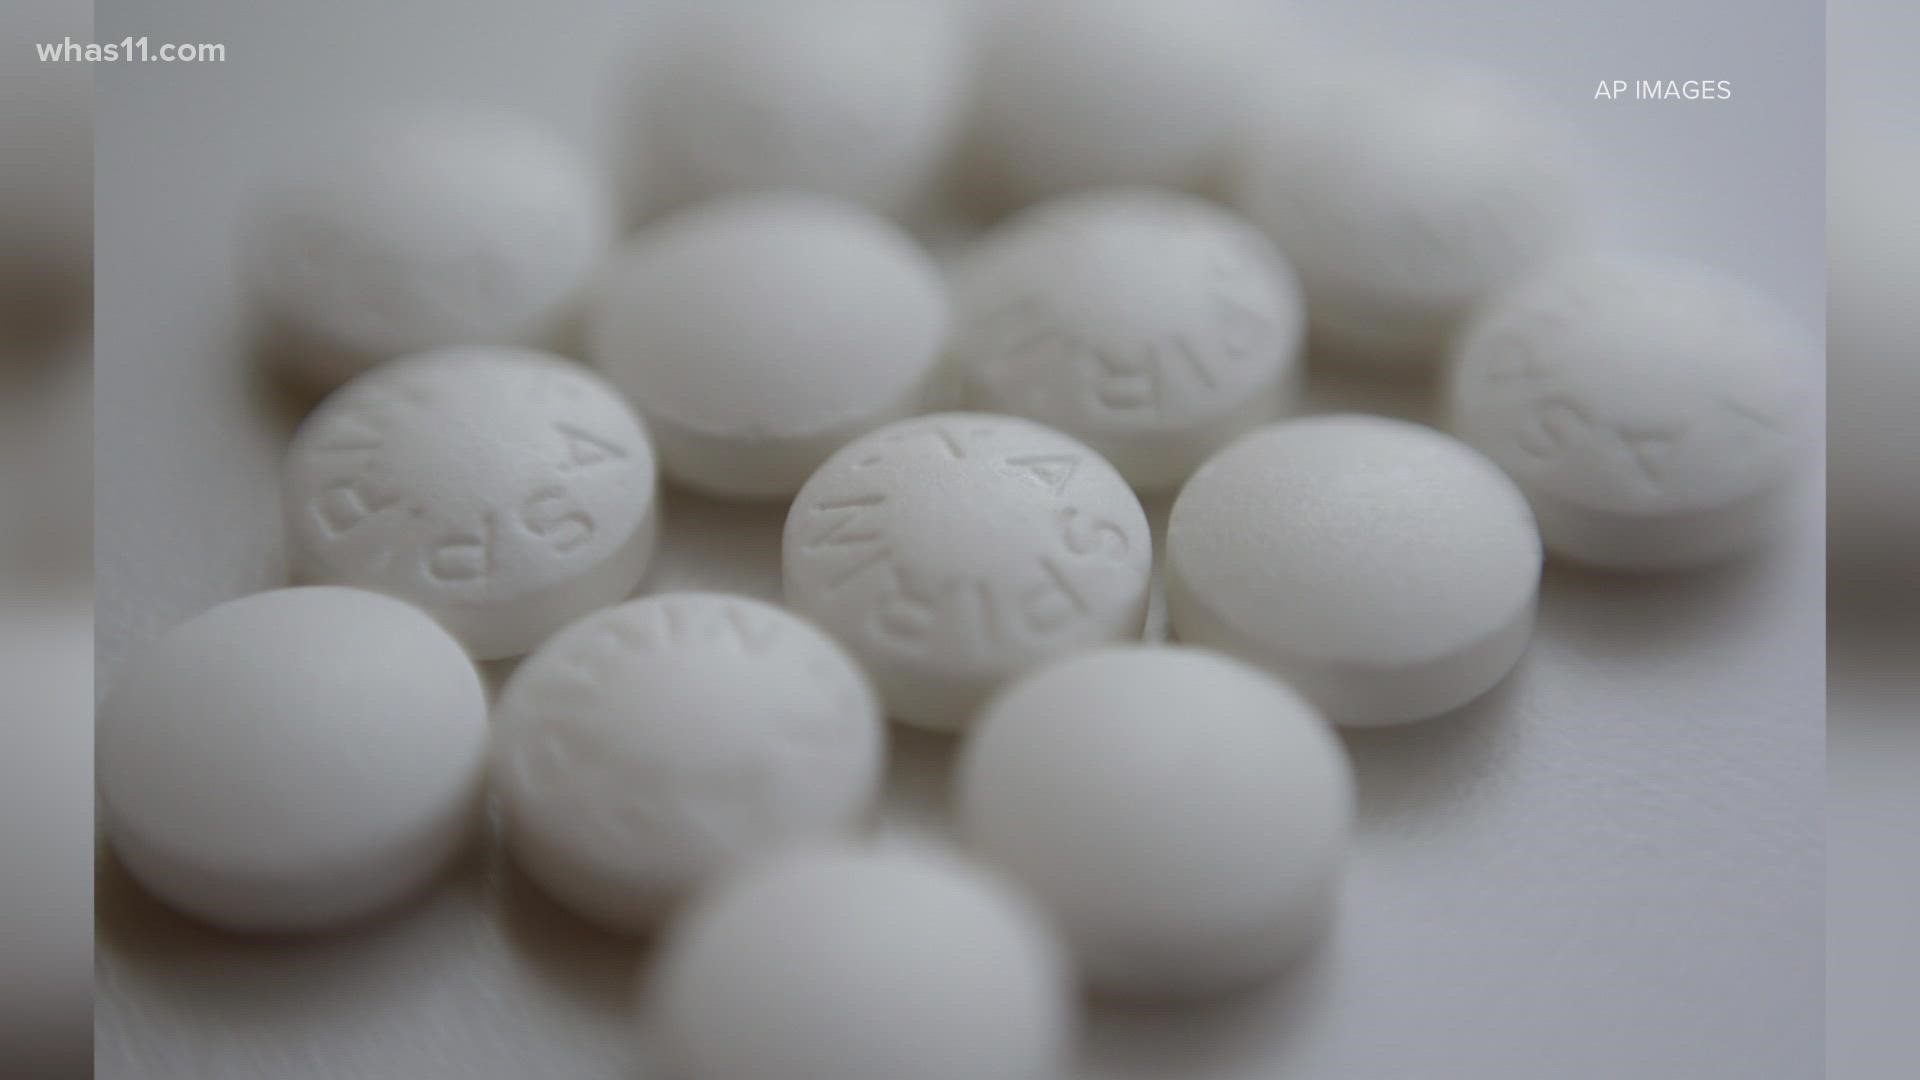 Older adults without heart disease shouldn't take daily low-dose aspirin to prevent a first heart attack or stroke, new research suggests.